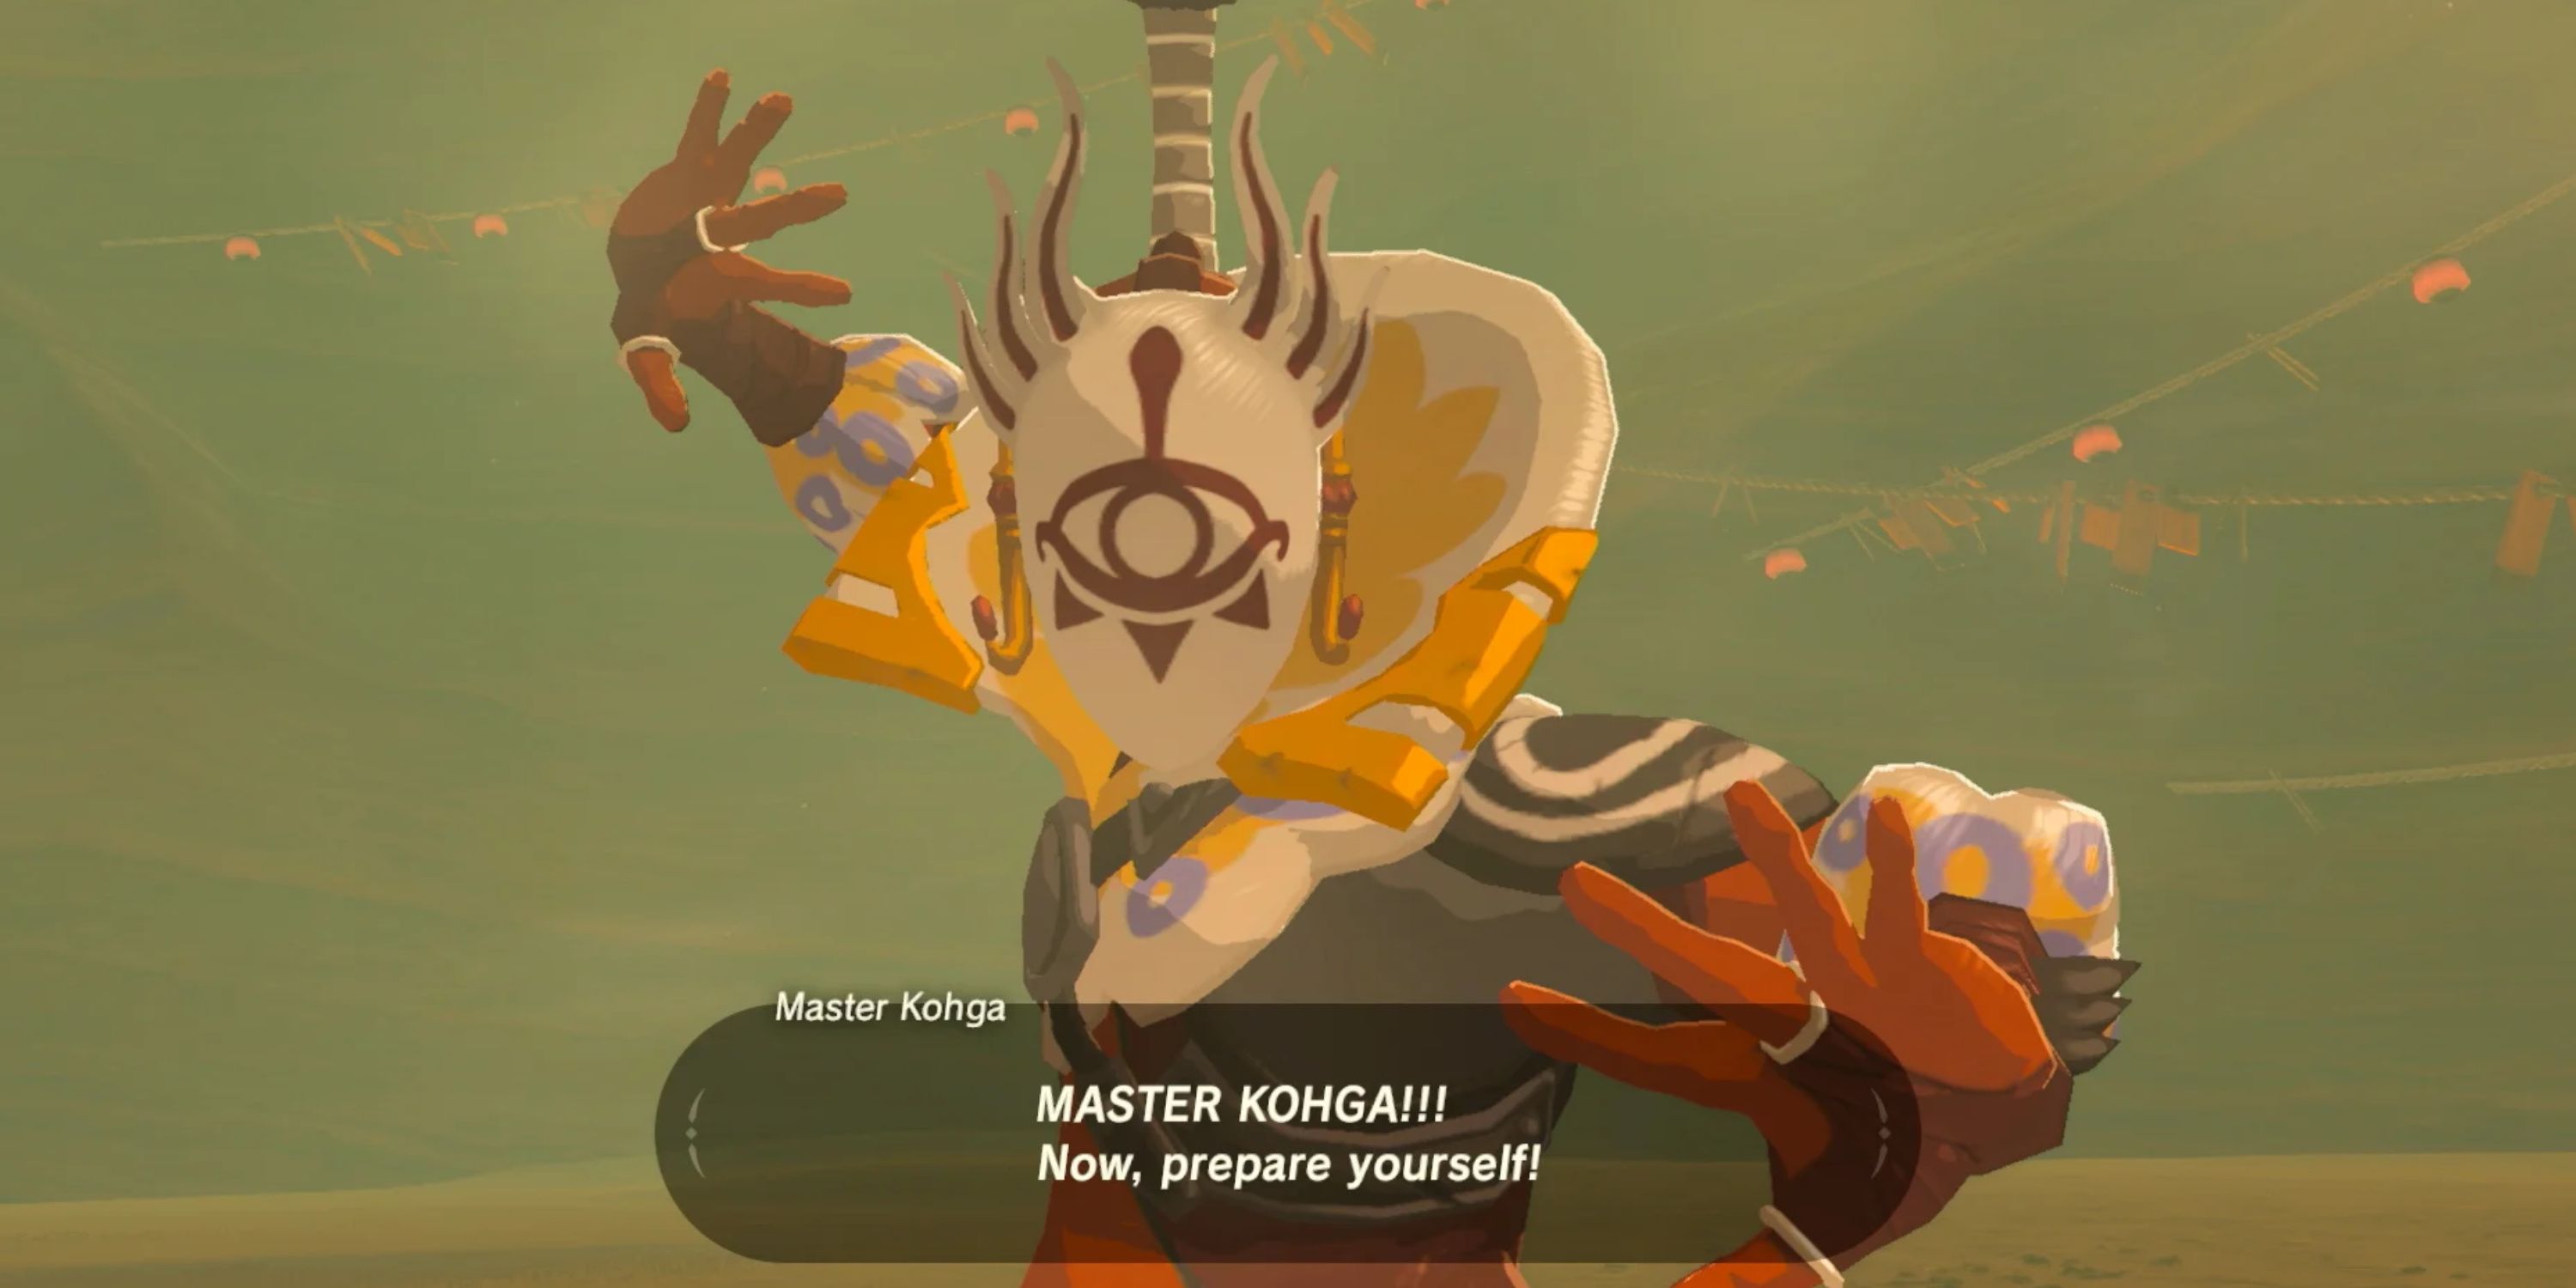 Link is about to battle Master Kohga in Breath of the Wild